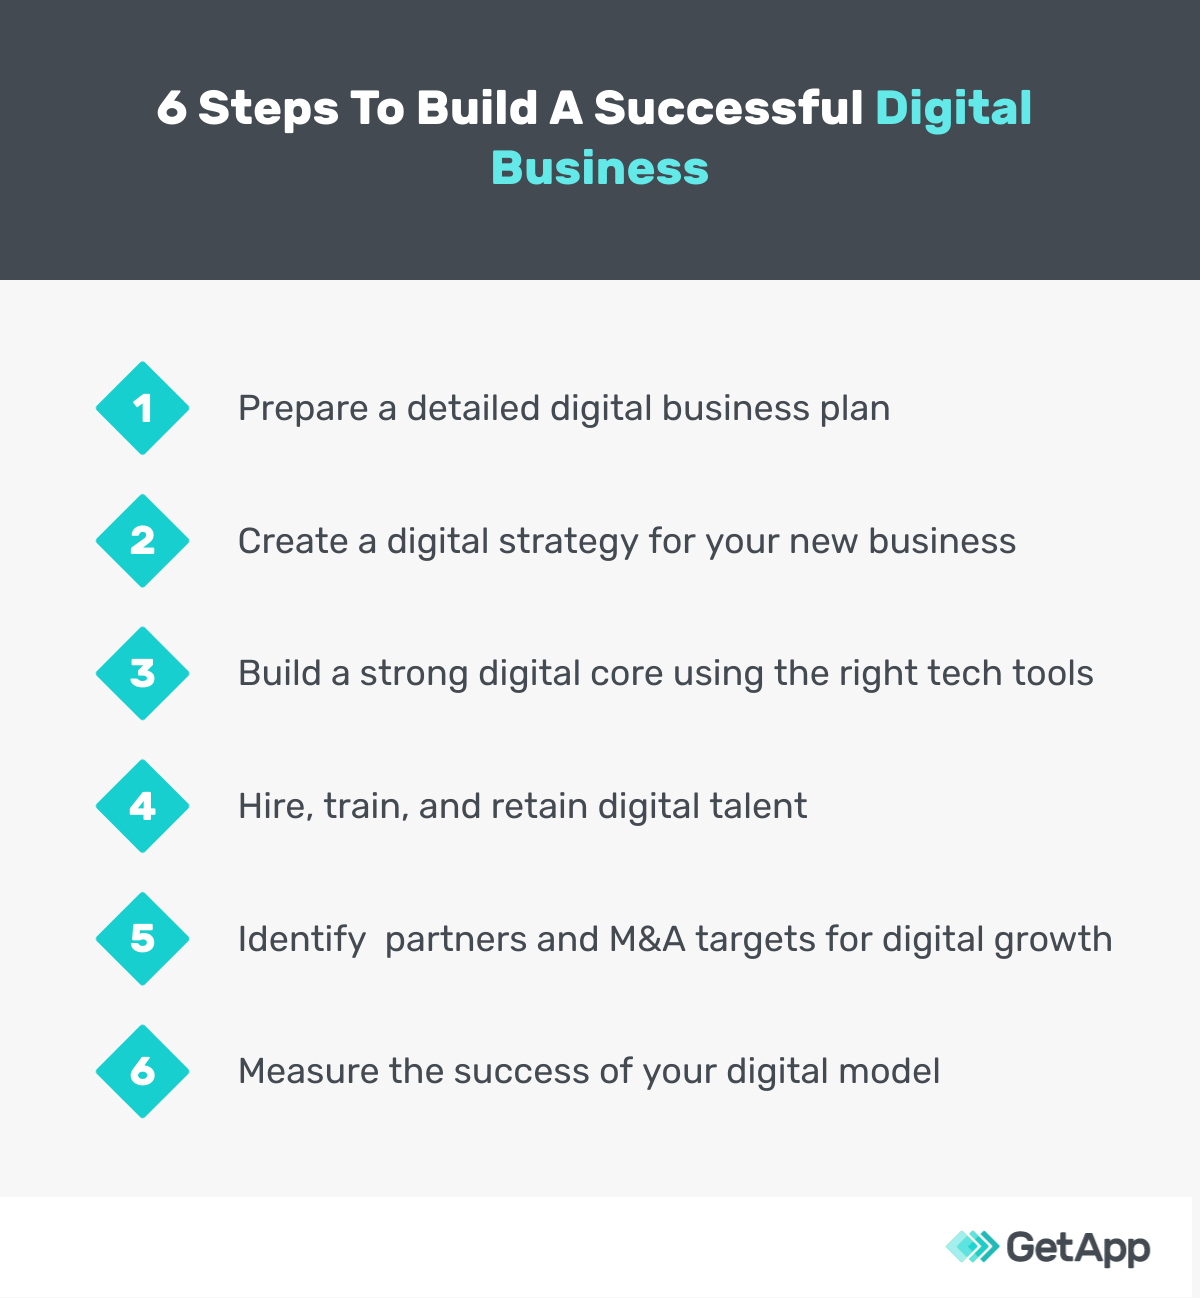 How To Kick-Start Your Digital Business